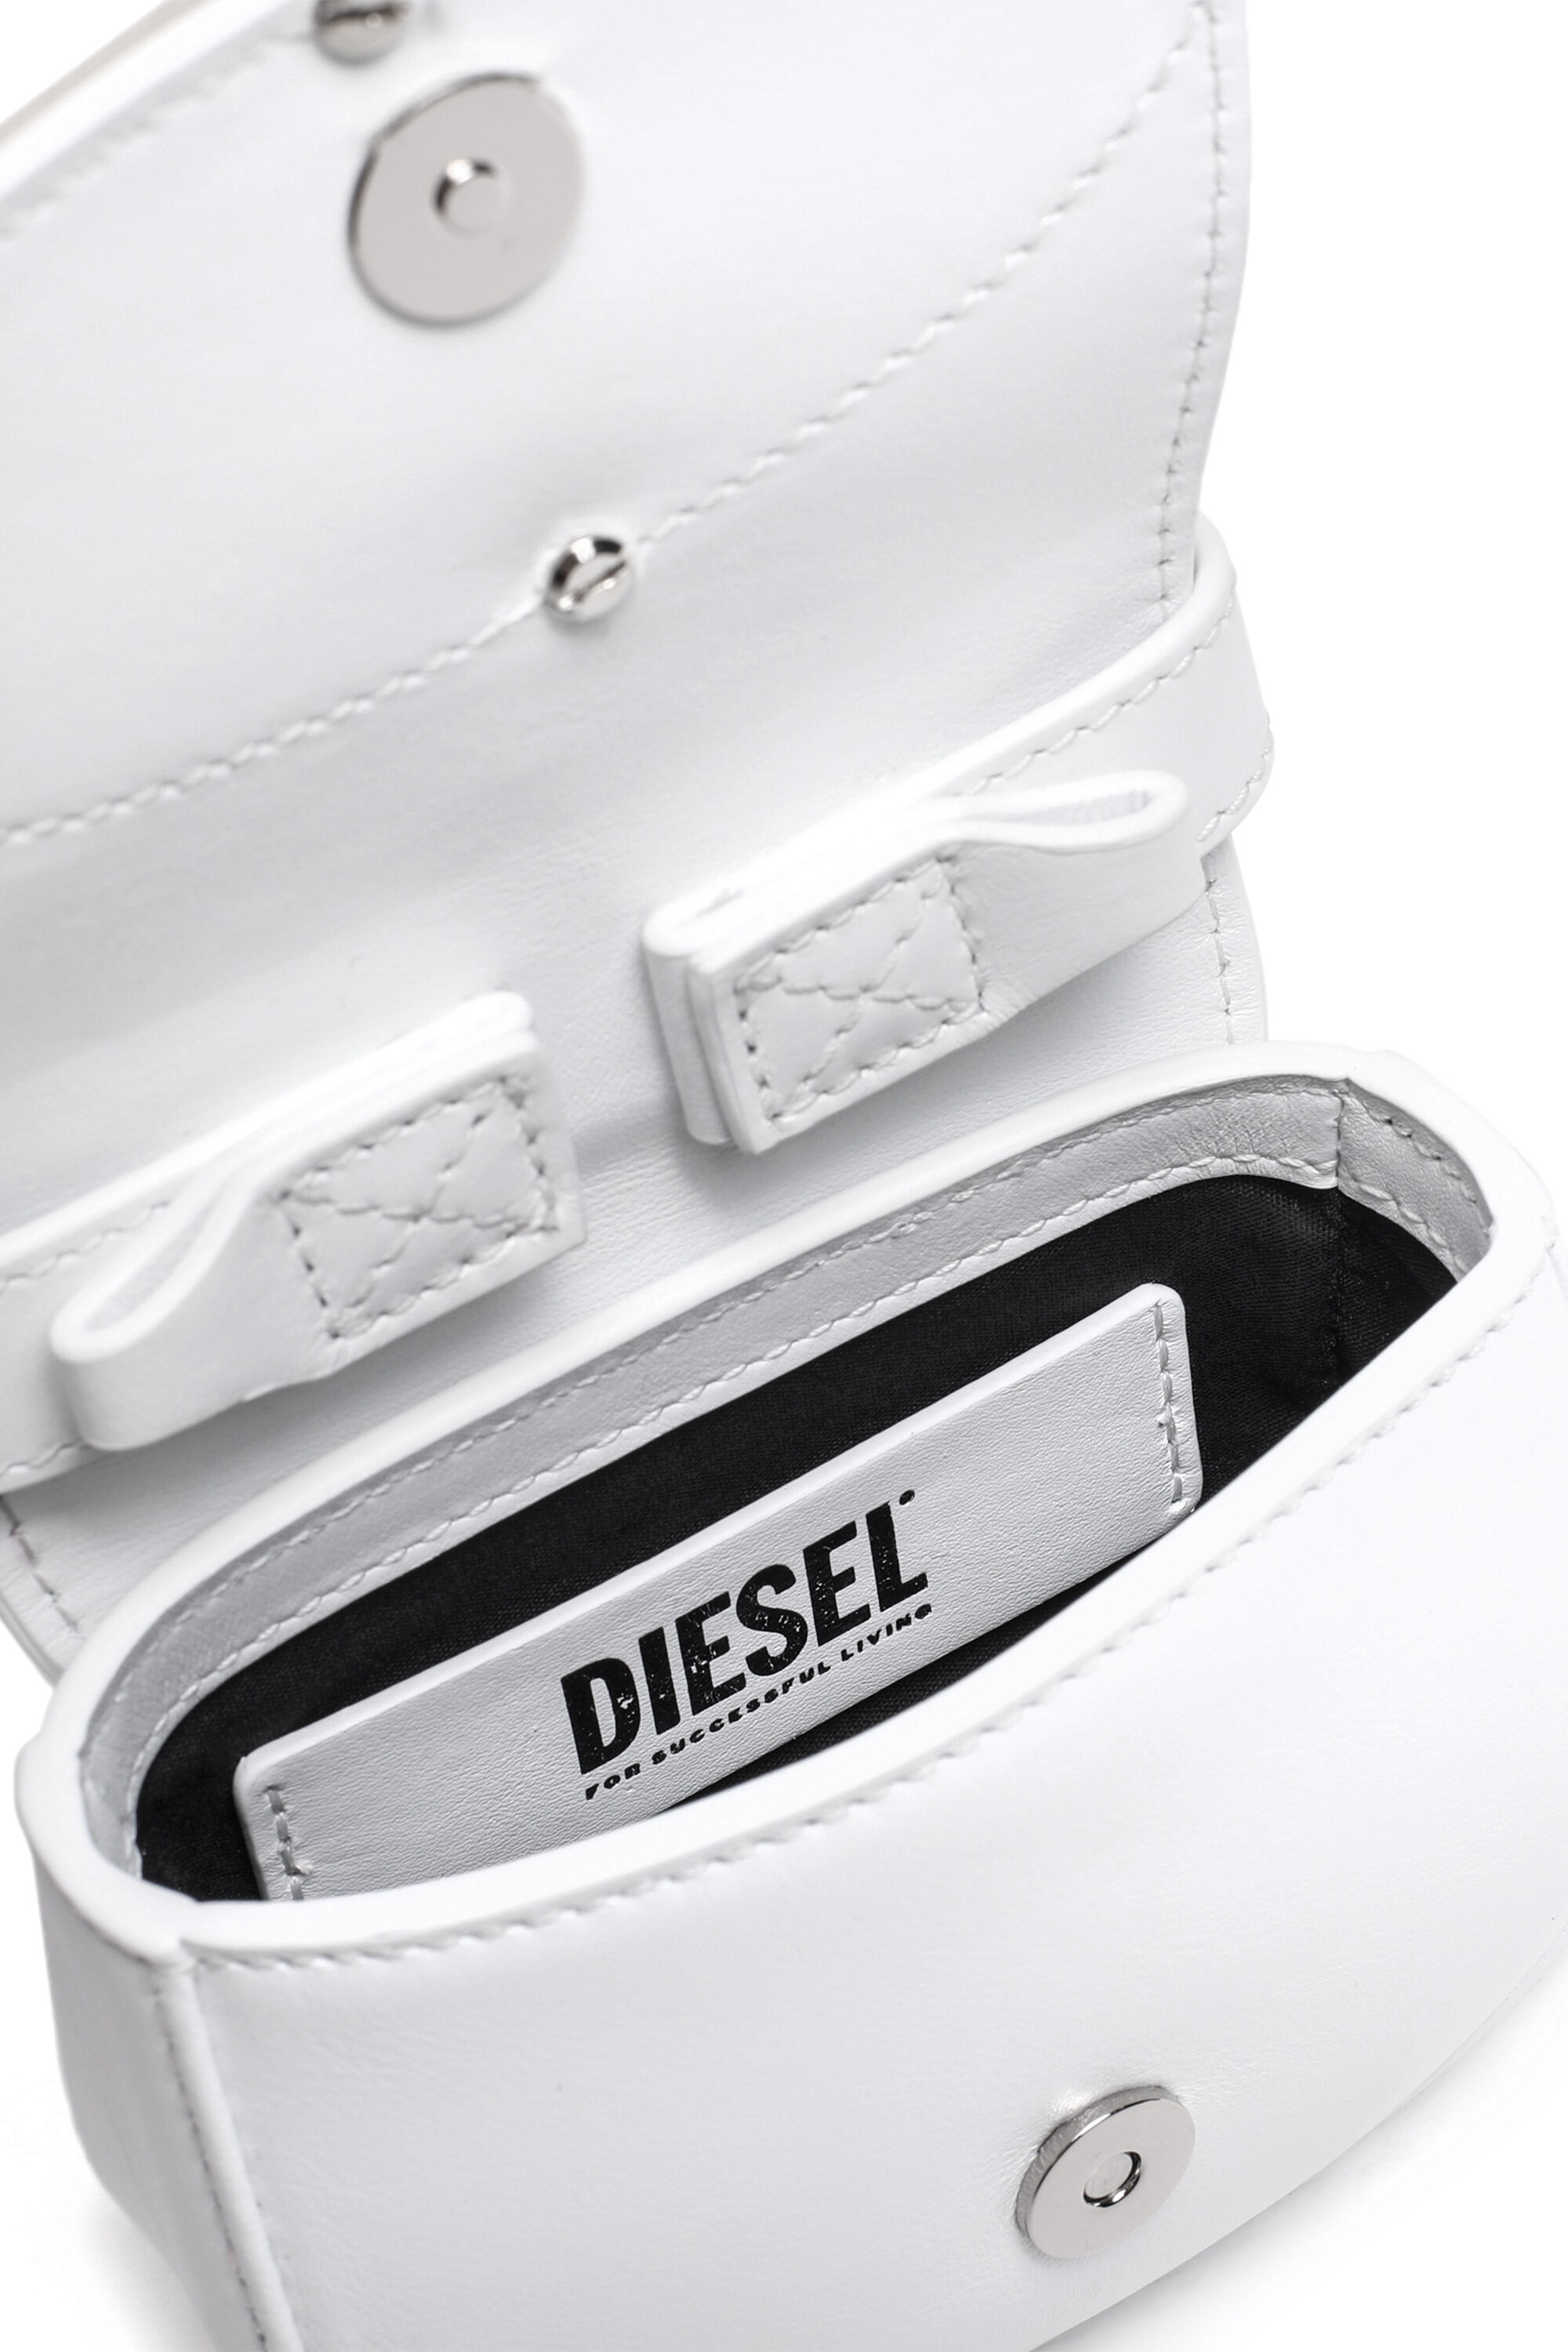 Diesel - 1DR XS, Female 1DR XS-Iconic mini bag with D logo plaque in White - Image 2